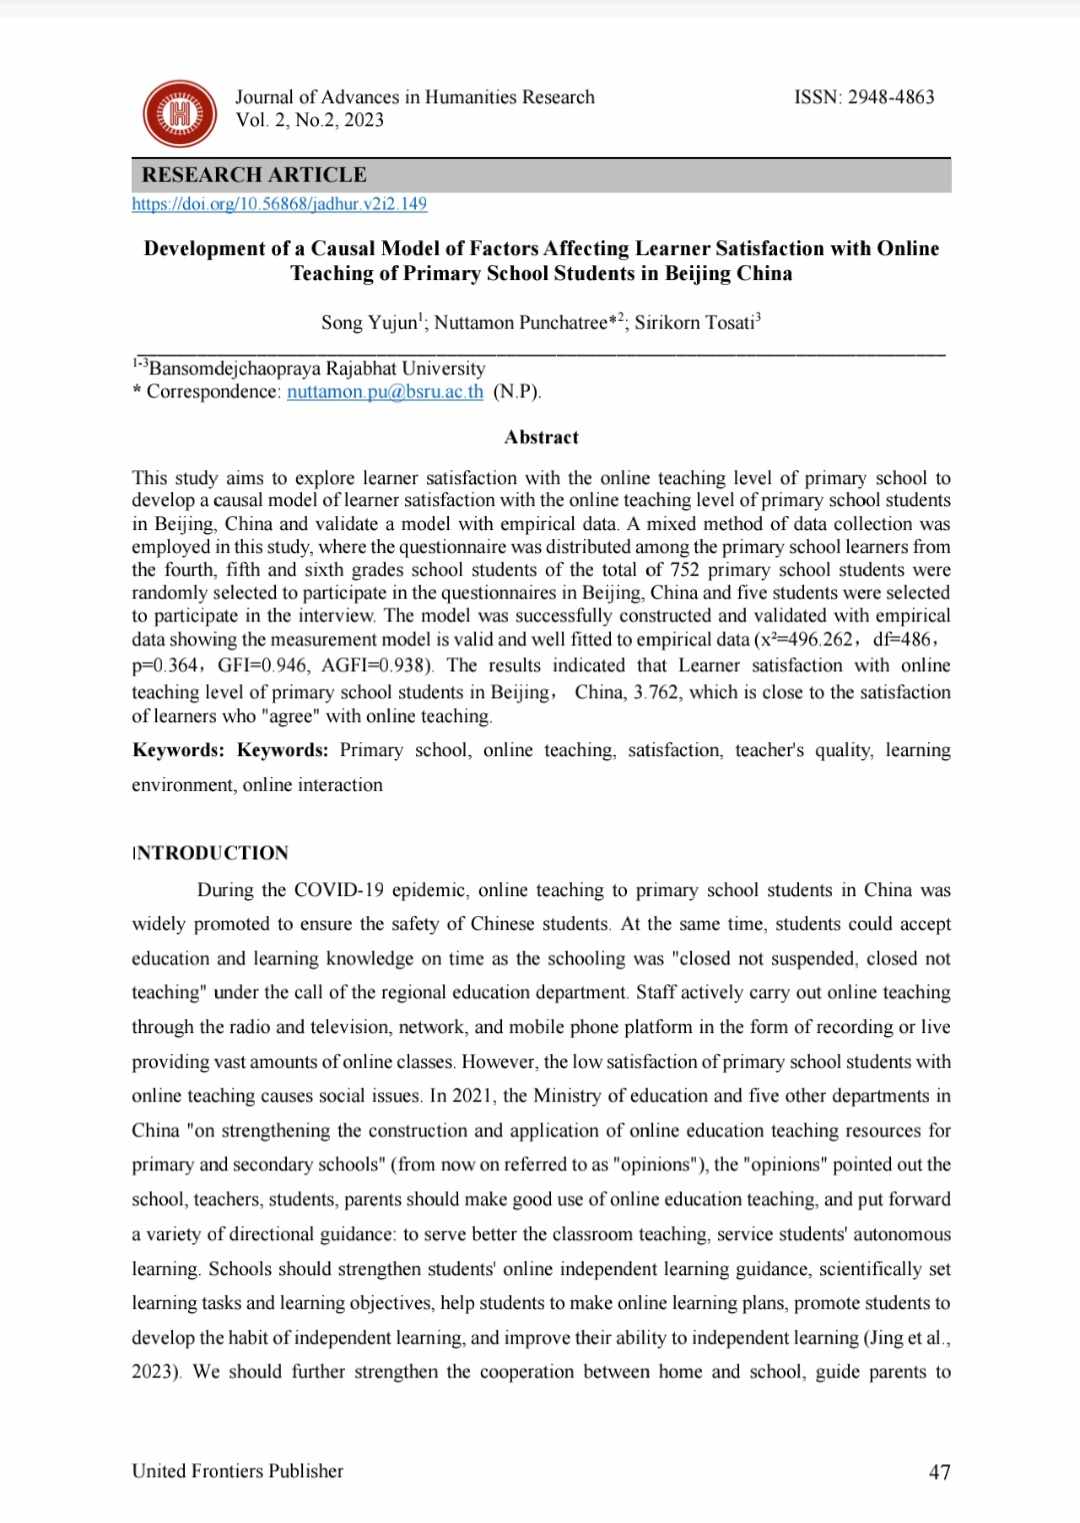 Development of a Causal Model of Factors Affecting Learner Satisfaction with Online Teaching of Primary School Students in Beijing China